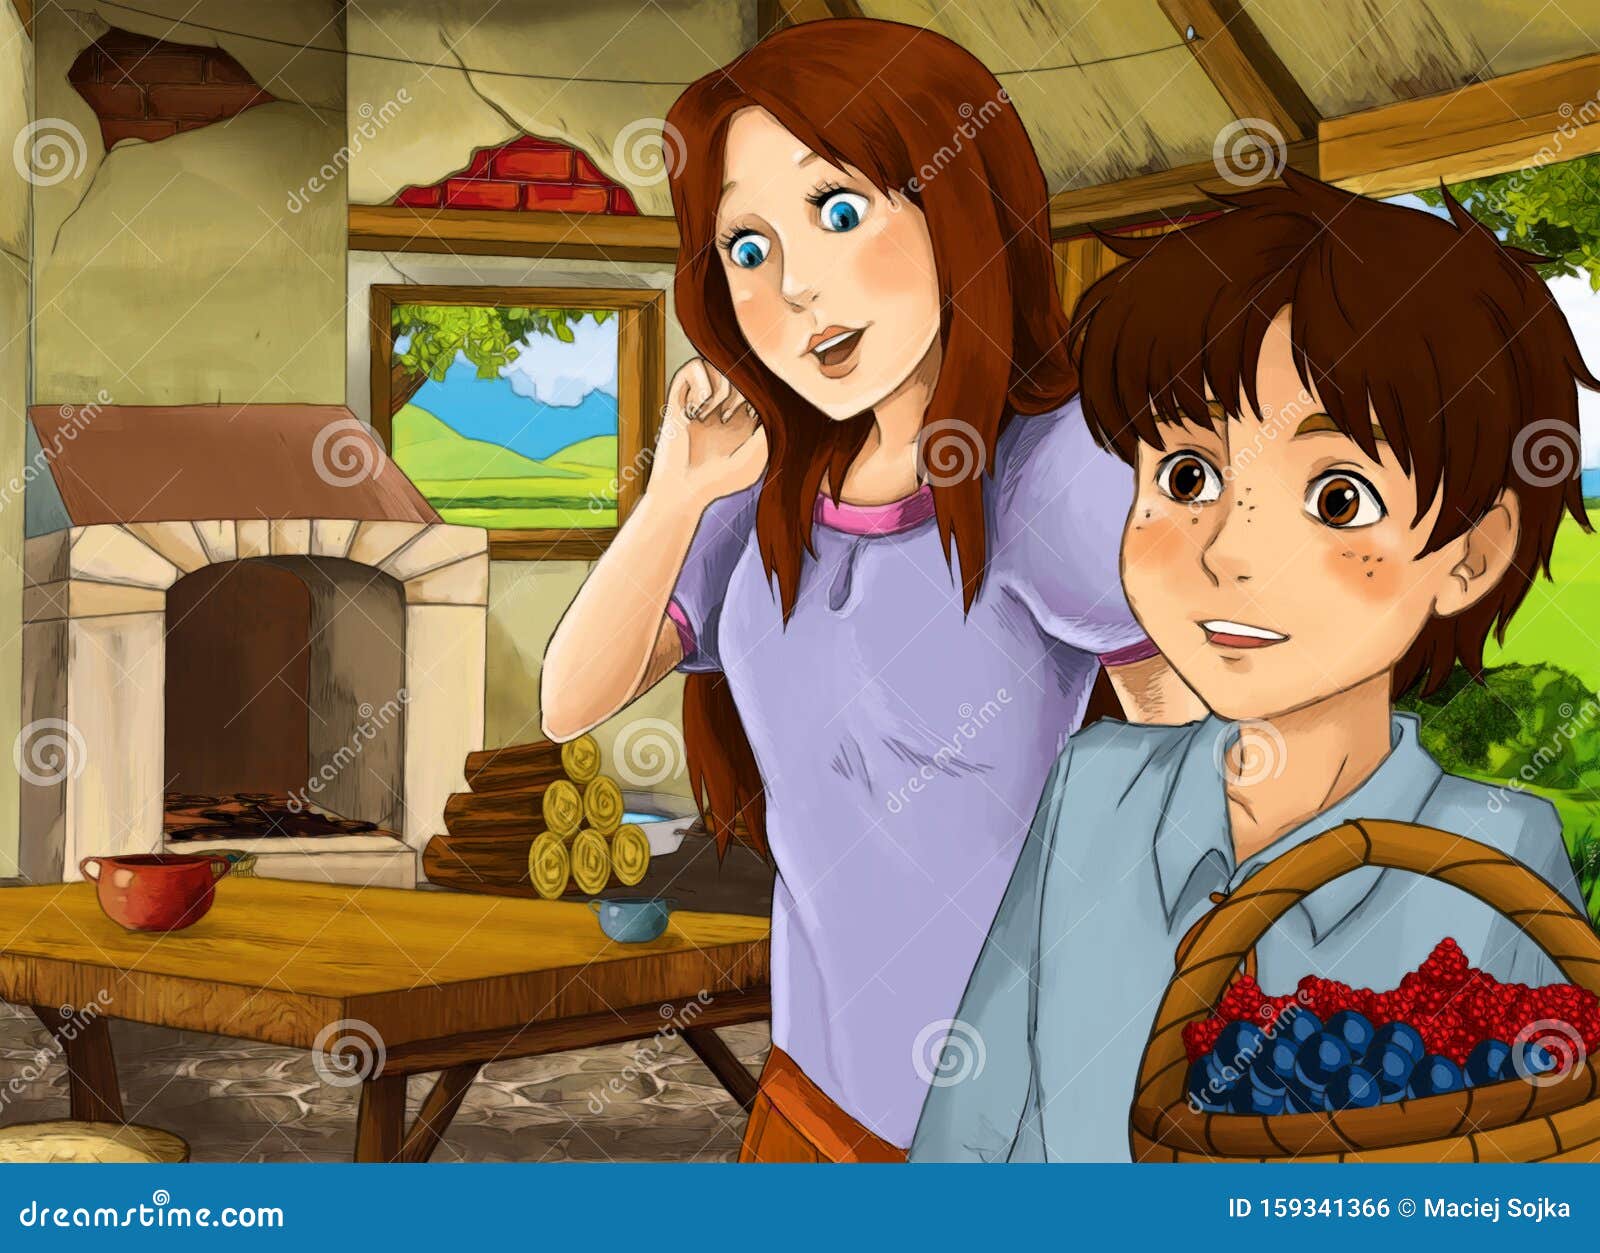 Cartoon Scene with Old Kitchen in Farm House with Happy Woman and Girl and  Boy and Father Stock Illustration - Illustration of furnace, children:  159341366